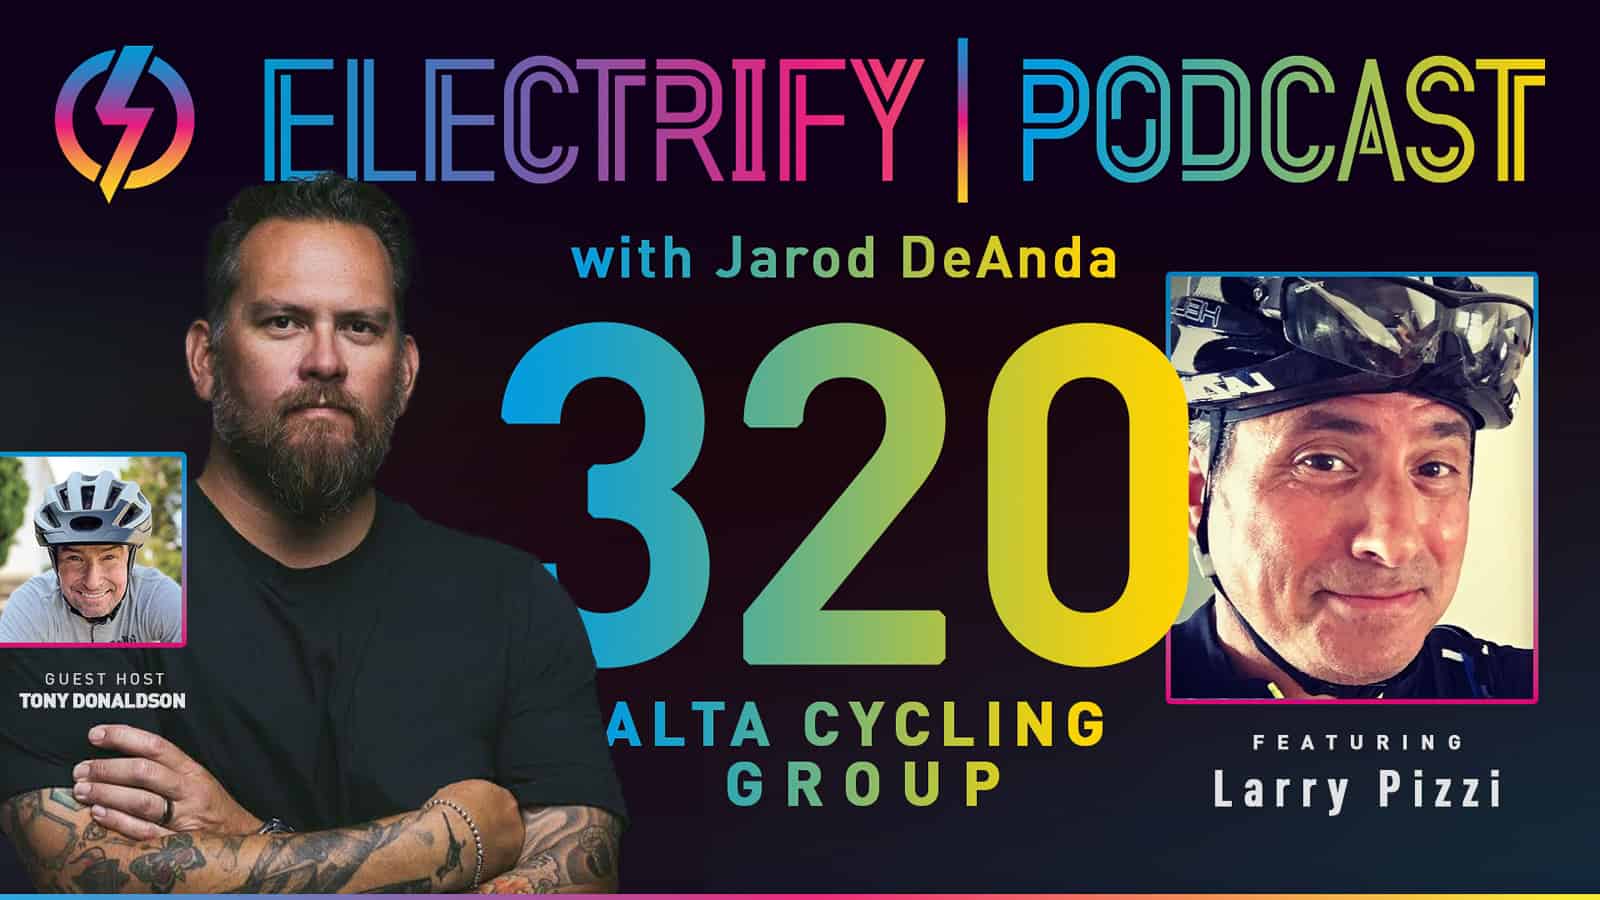 Promotional image for Electrify Podcast Episode 320 with host Jarod DeAnda, guest host Tony Donaldson, and guest Larry Pizzi, titled Alta Cycling Group